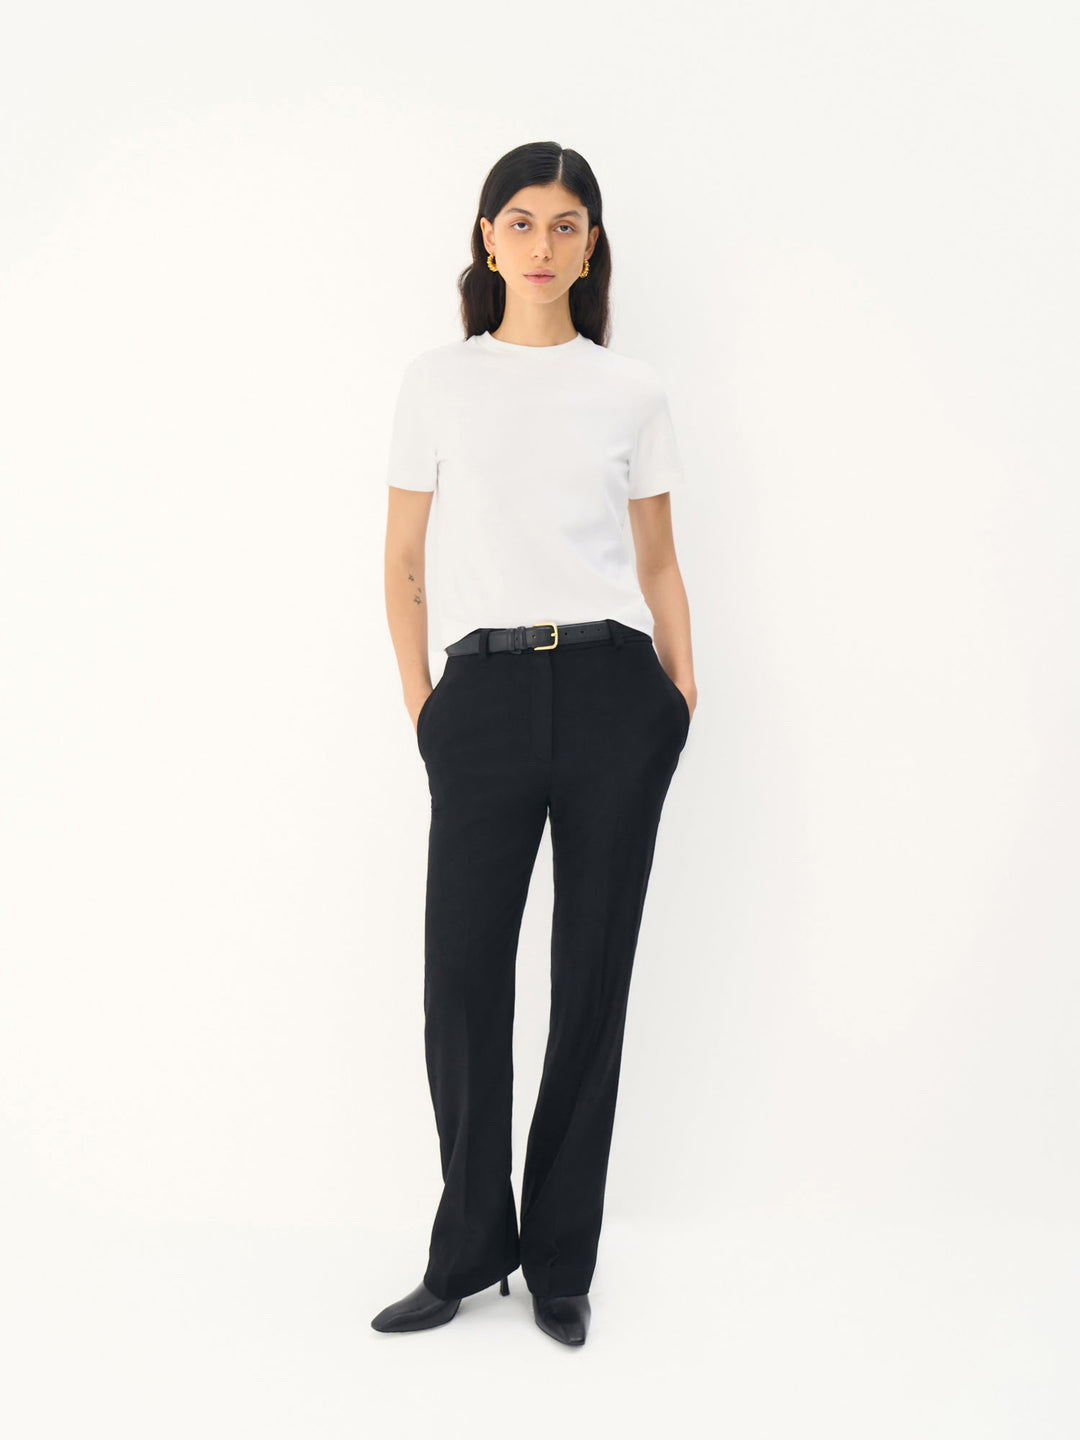 Women - Wool - Cashmere - Classic - Fitted - Pants - Black